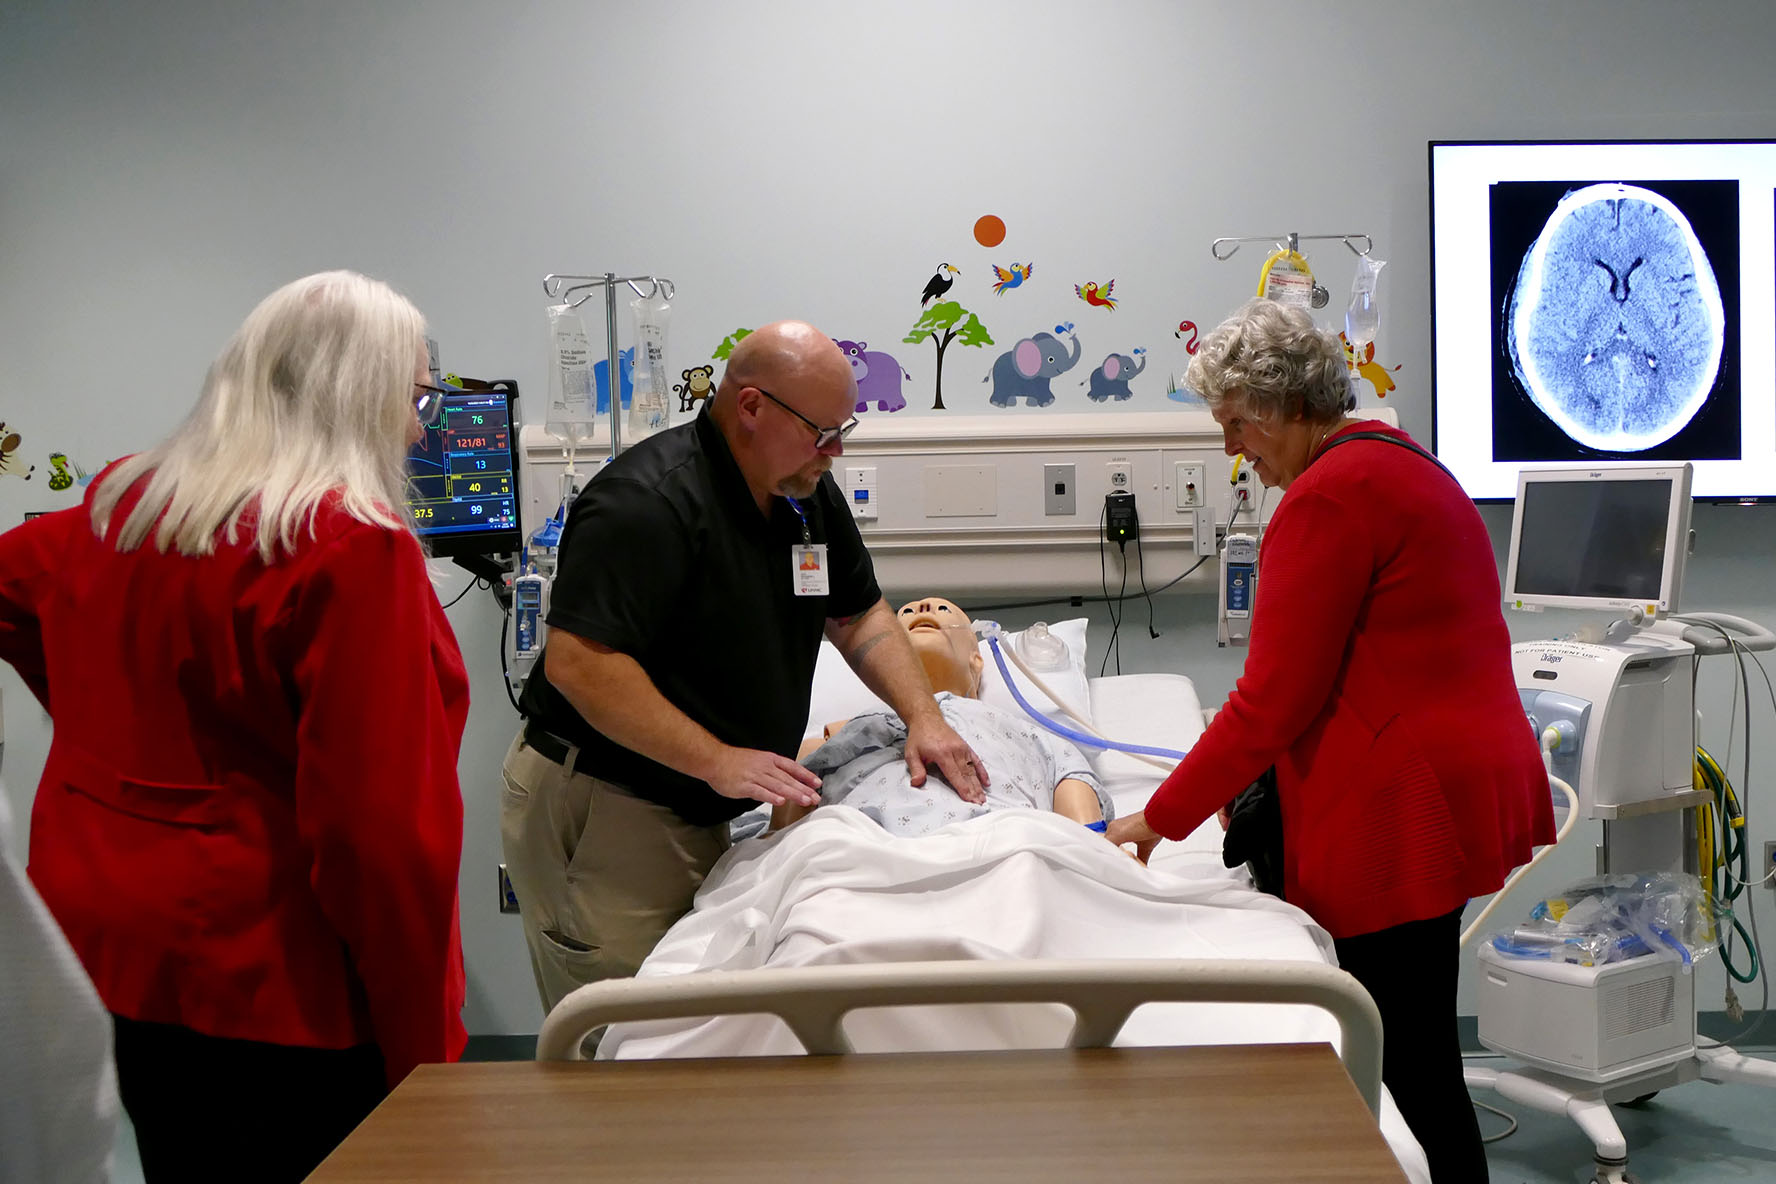 President&apos;s Advisory Council members Dori Bush&comma; at left&comma; and Jane Schuchardt&comma; at right&comma; see a simulation manikin during their tour of iEXCEL and the Davis Global Center&period;